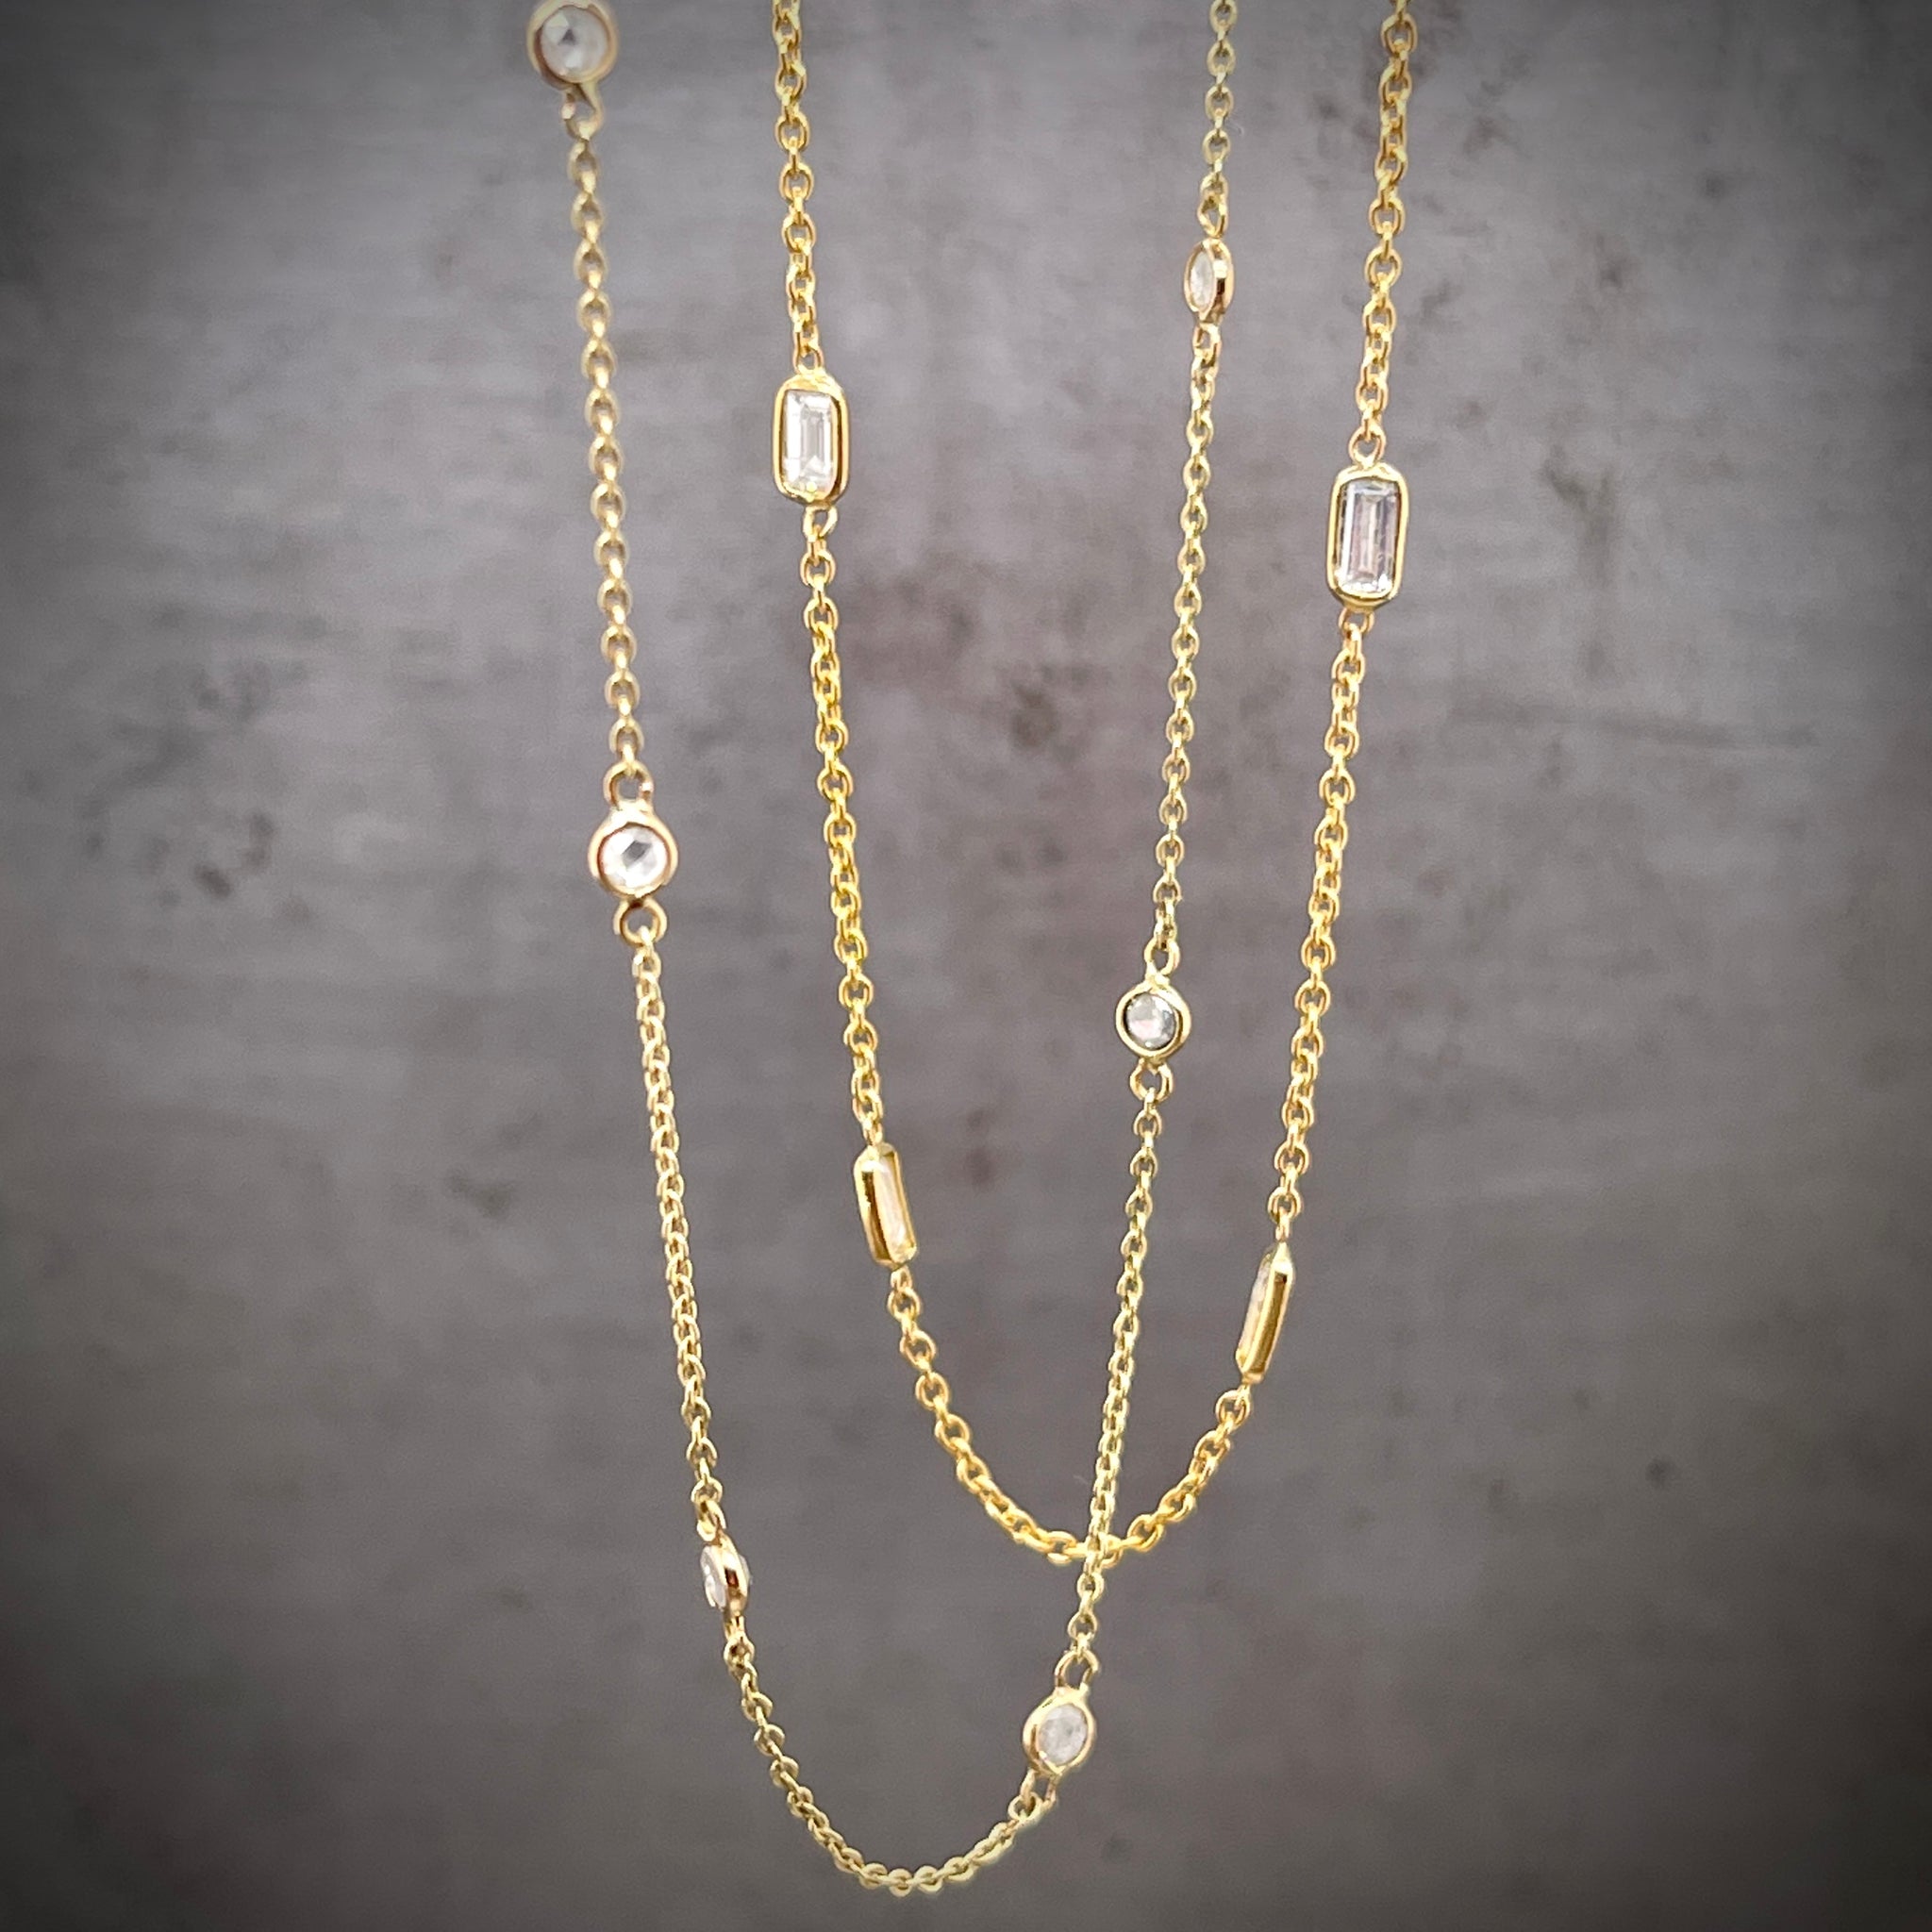 Cropped image of two necklaces hanging. The front-most necklace features round diamonds that are bezel set in gold and have an inch of chain between each diamond. The further back diamond necklace features baguette diamonds that are bezel set at every inch.